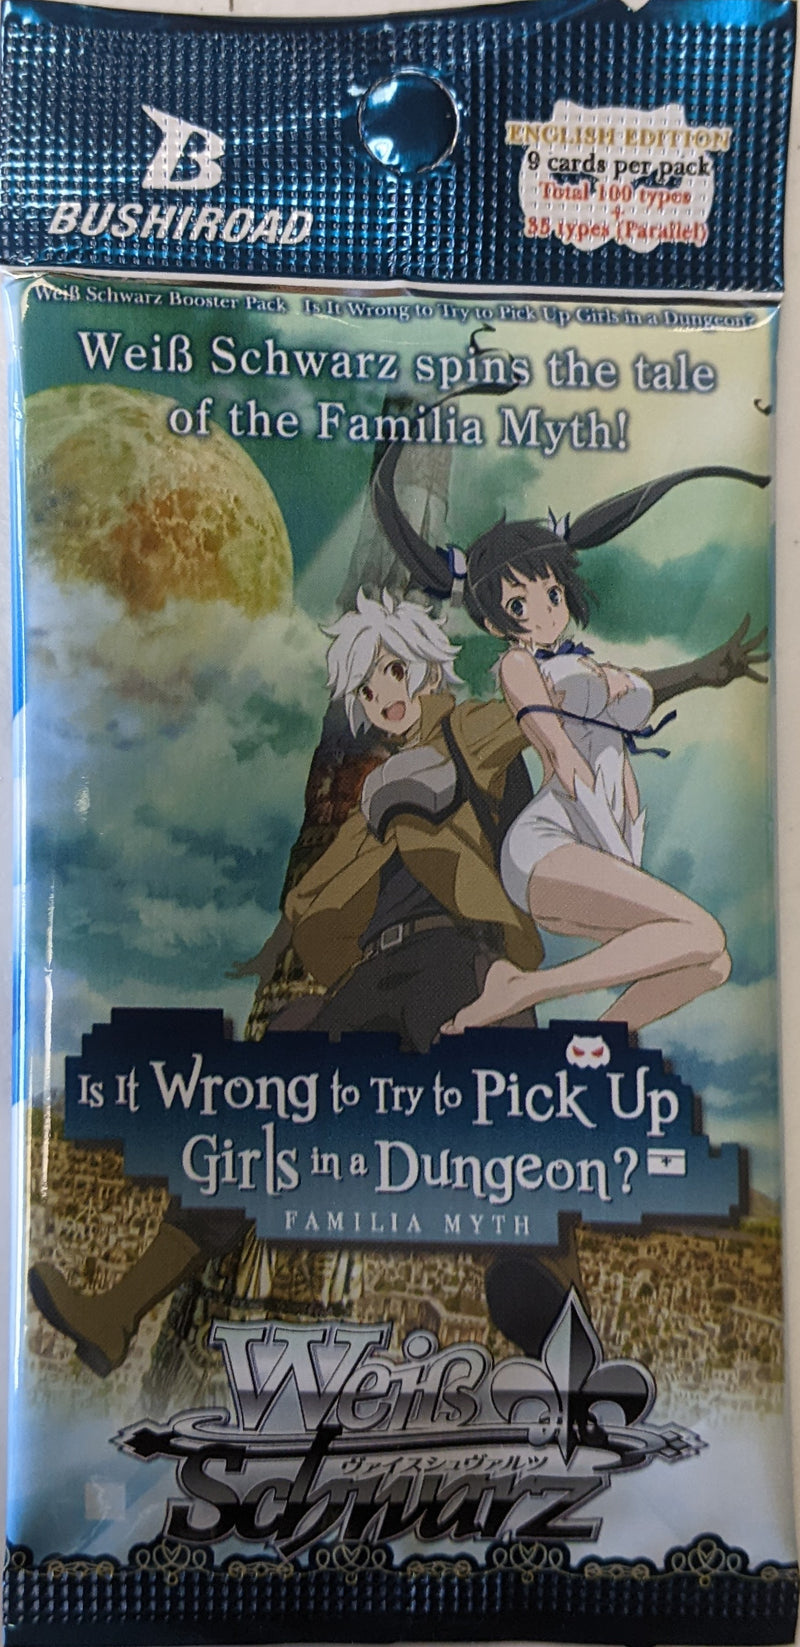 Booster Pack - Is it wrong to try to pick up girls in a dungeon?